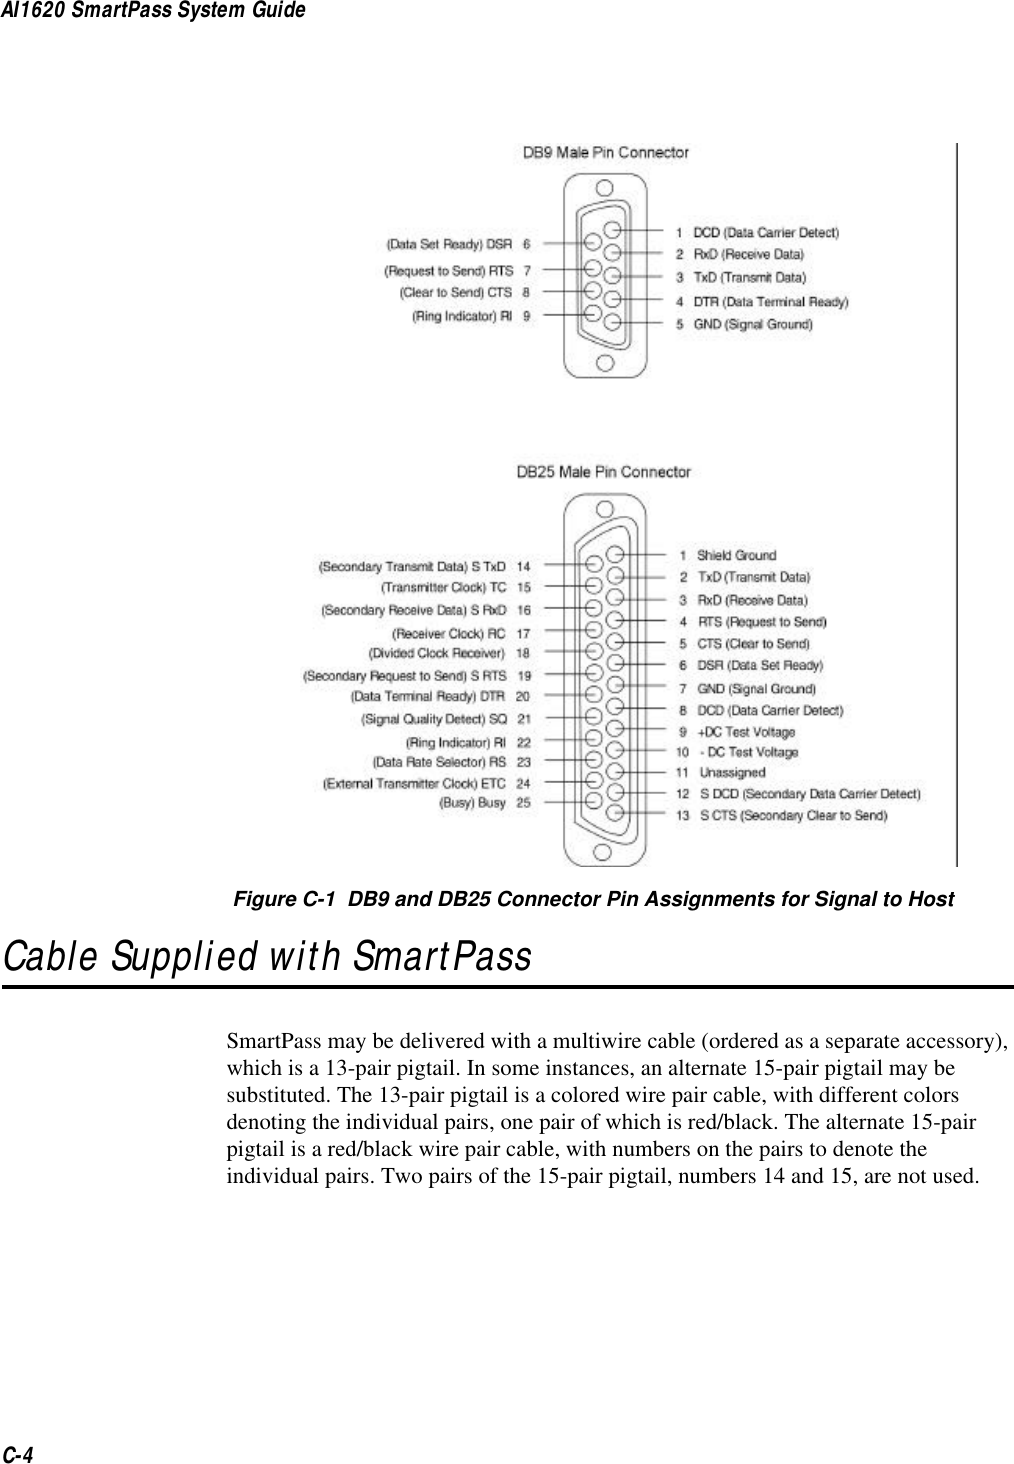 AI1620 SmartPass System GuideC-4  Figure C-1  DB9 and DB25 Connector Pin Assignments for Signal to HostCable Supplied with SmartPass SmartPass may be delivered with a multiwire cable (ordered as a separate accessory), which is a 13-pair pigtail. In some instances, an alternate 15-pair pigtail may be substituted. The 13-pair pigtail is a colored wire pair cable, with different colors denoting the individual pairs, one pair of which is red/black. The alternate 15-pair pigtail is a red/black wire pair cable, with numbers on the pairs to denote the individual pairs. Two pairs of the 15-pair pigtail, numbers 14 and 15, are not used.